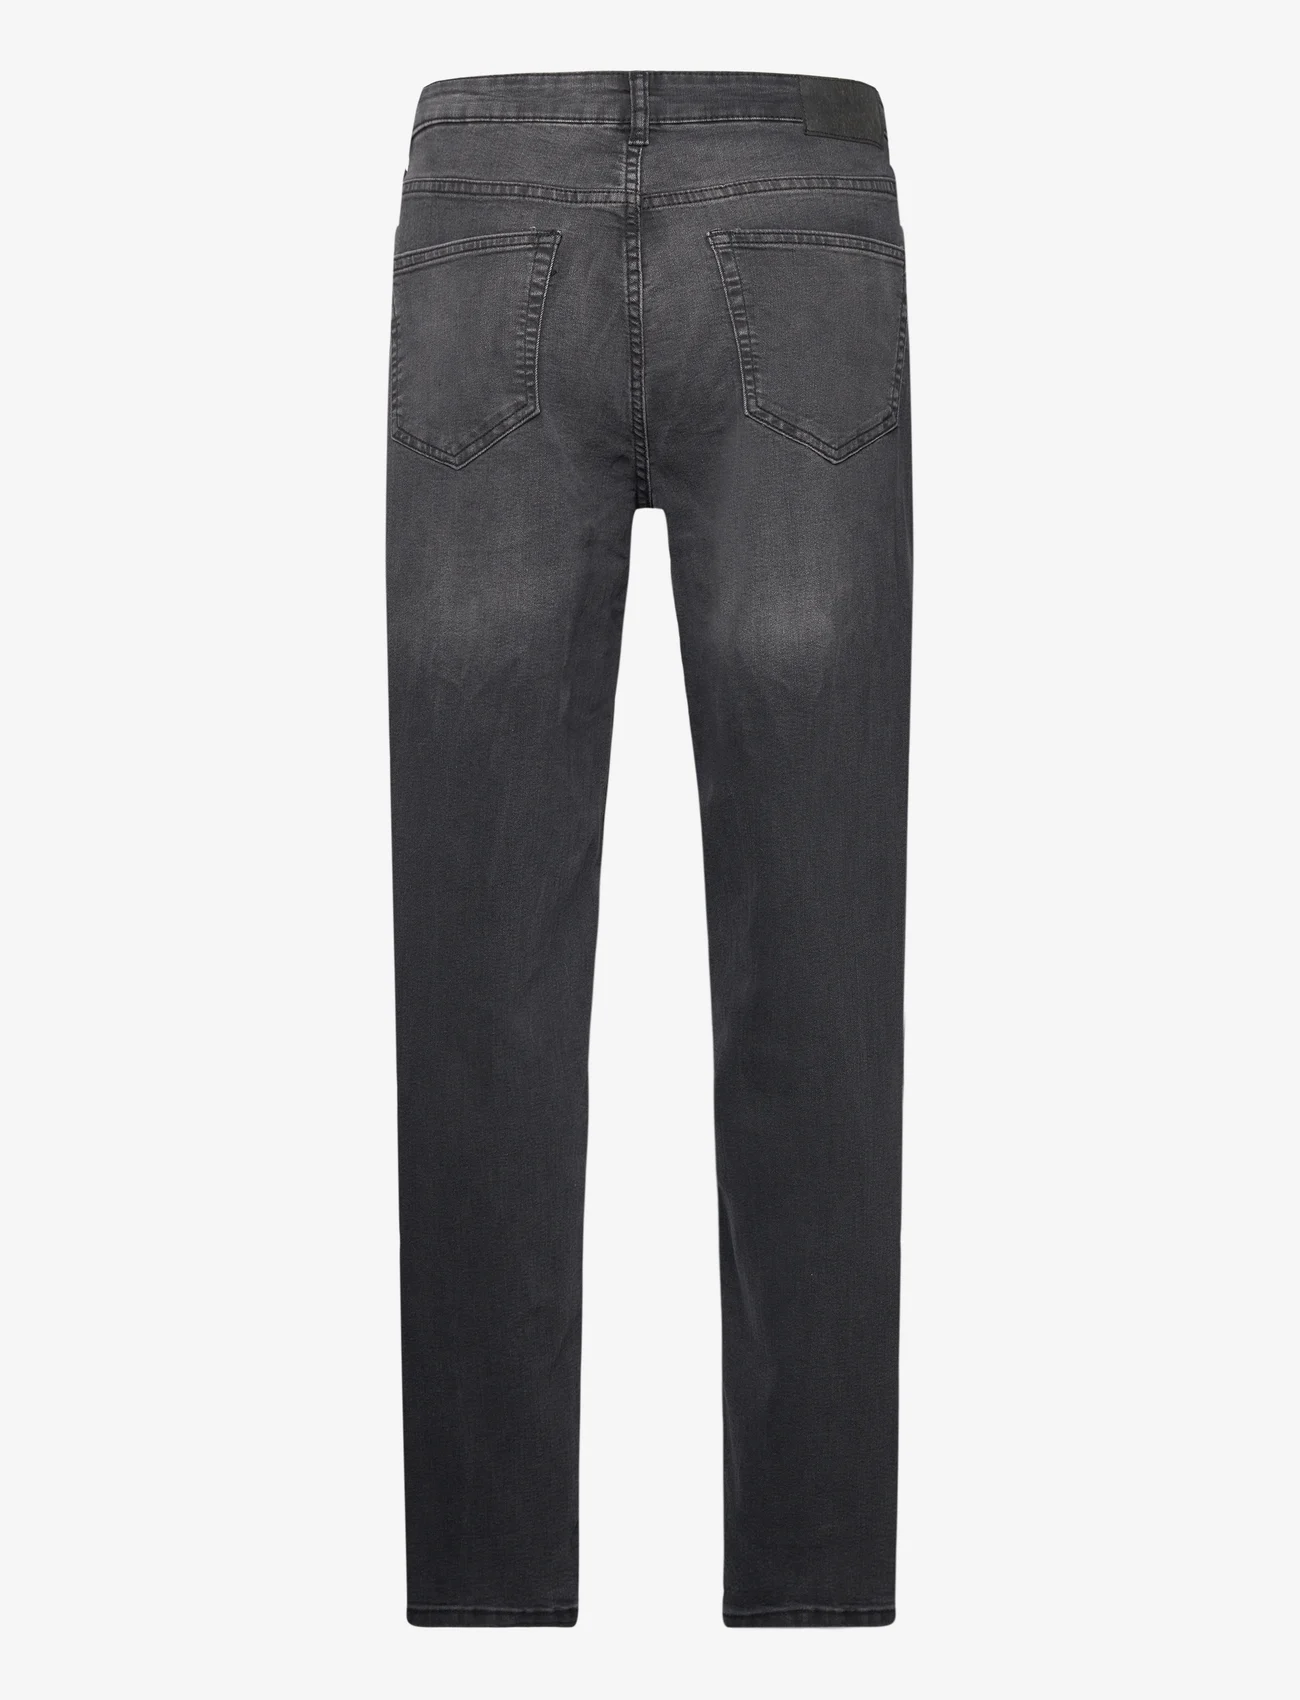 Denim project - DPRECYCLED CARROT JEANS - tapered jeans - black stone wash - 1